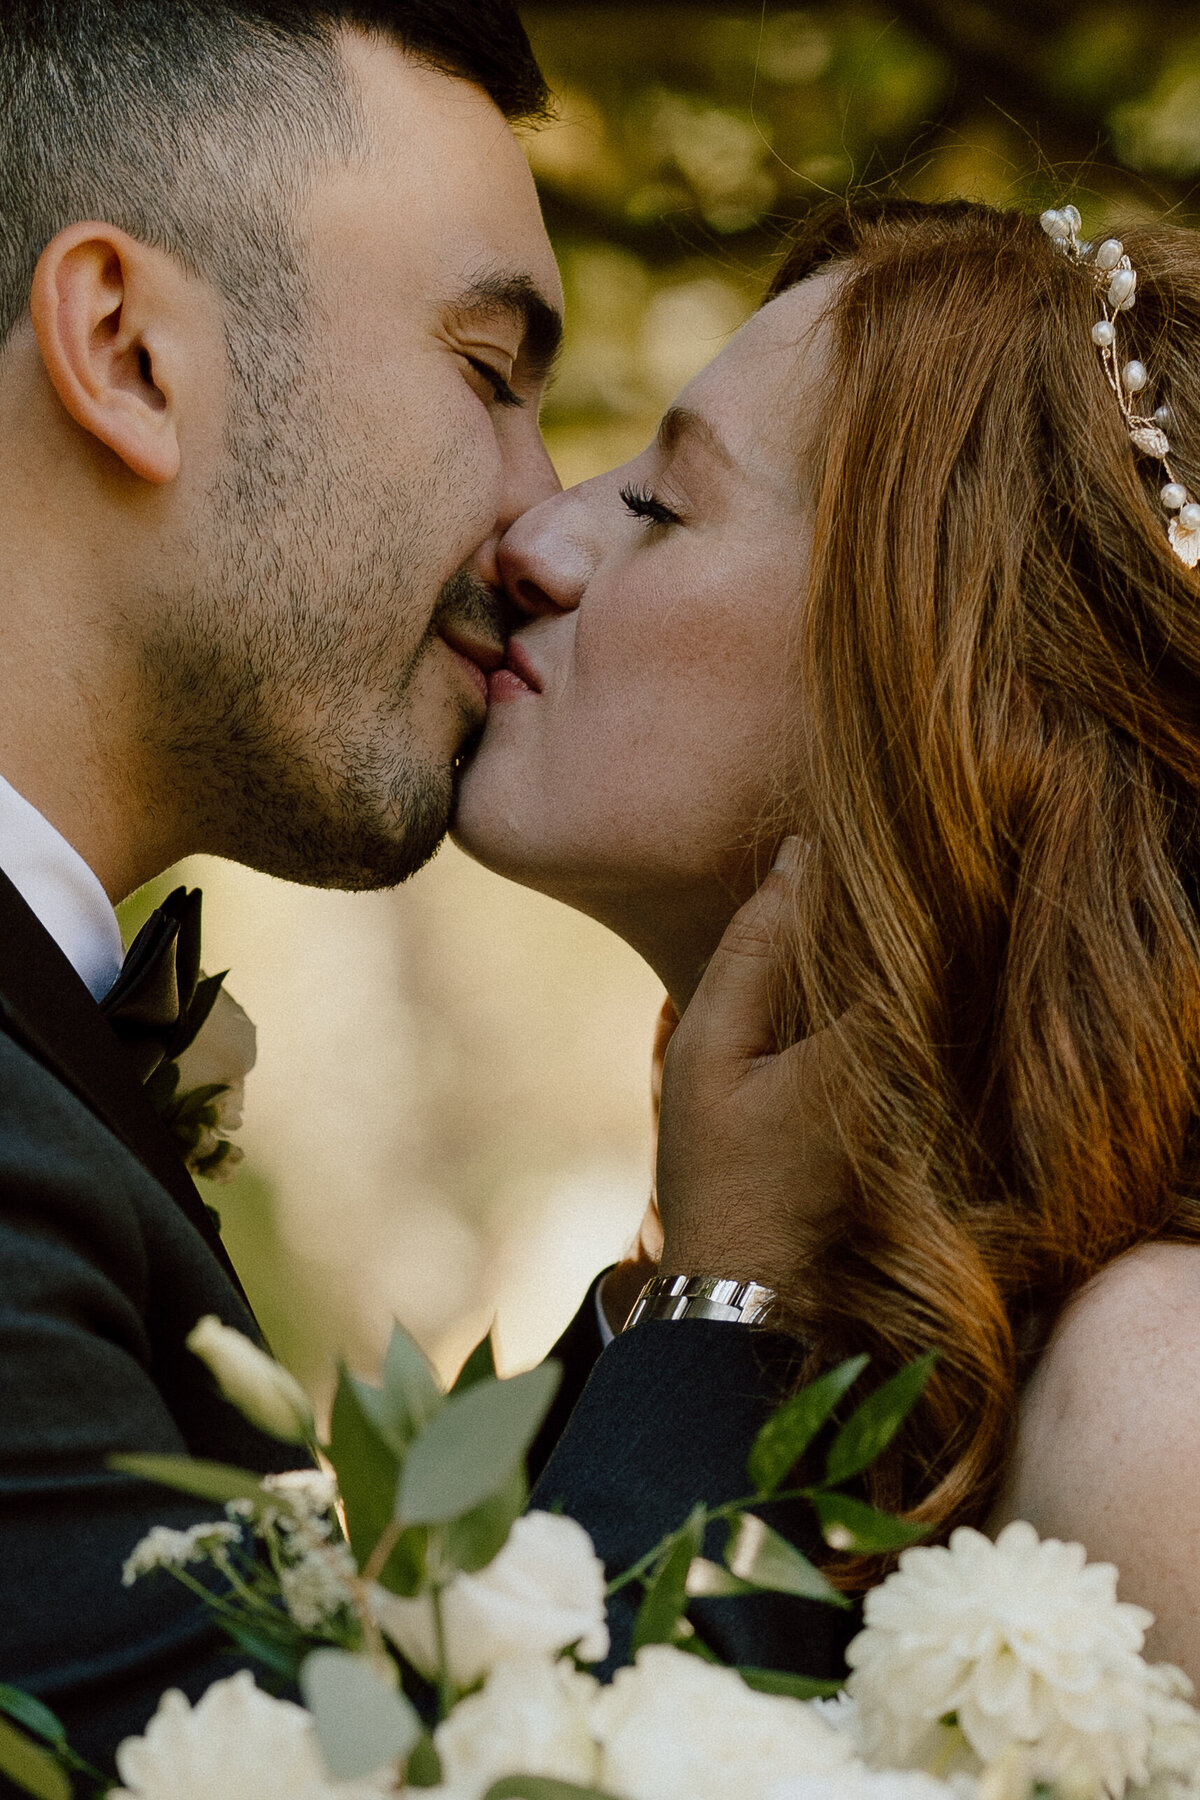 Close-up of a bride and groom sharing an intimate kiss on their wedding day. The bride, with red hair and a delicate hairpiece, and the groom, in a black tuxedo with a white boutonniere, are captured in a tender moment. The groom's hand gently cups the bride's face, and a bouquet of white flowers with green foliage is visible in the foreground, adding to the romantic atmosphere of the photograph.